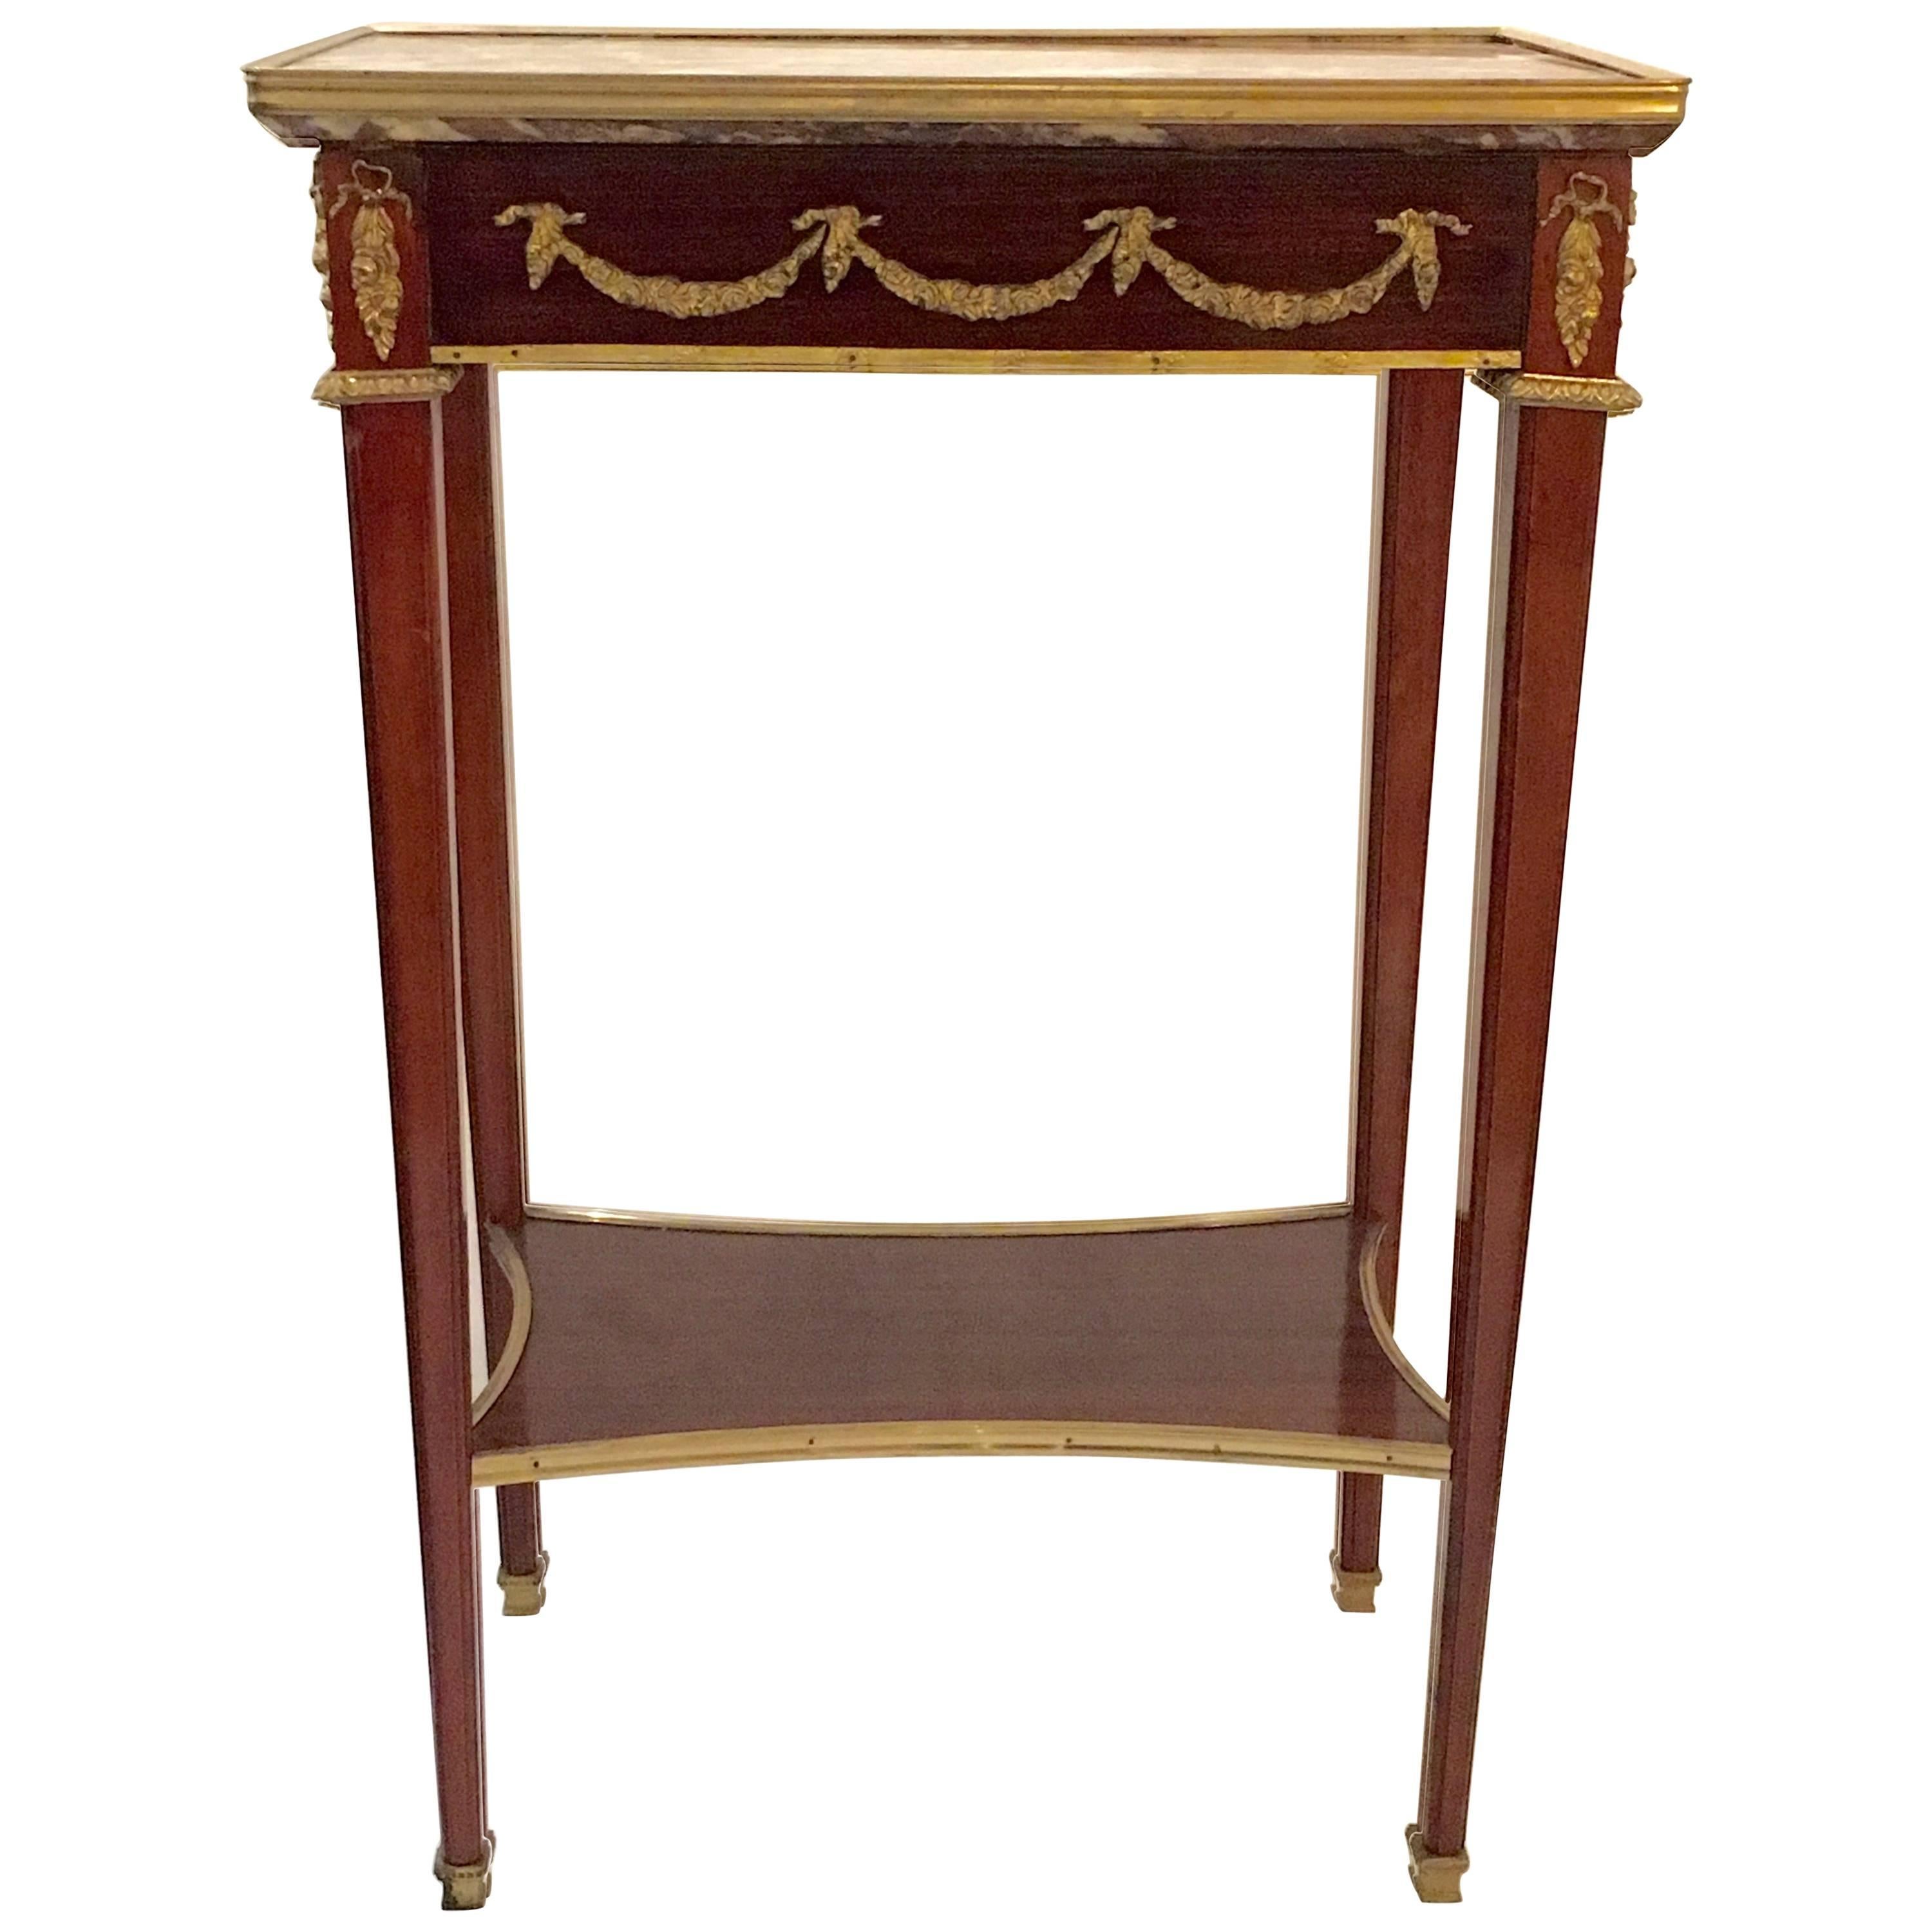 Elegant French Mahogany and Marble Side Table